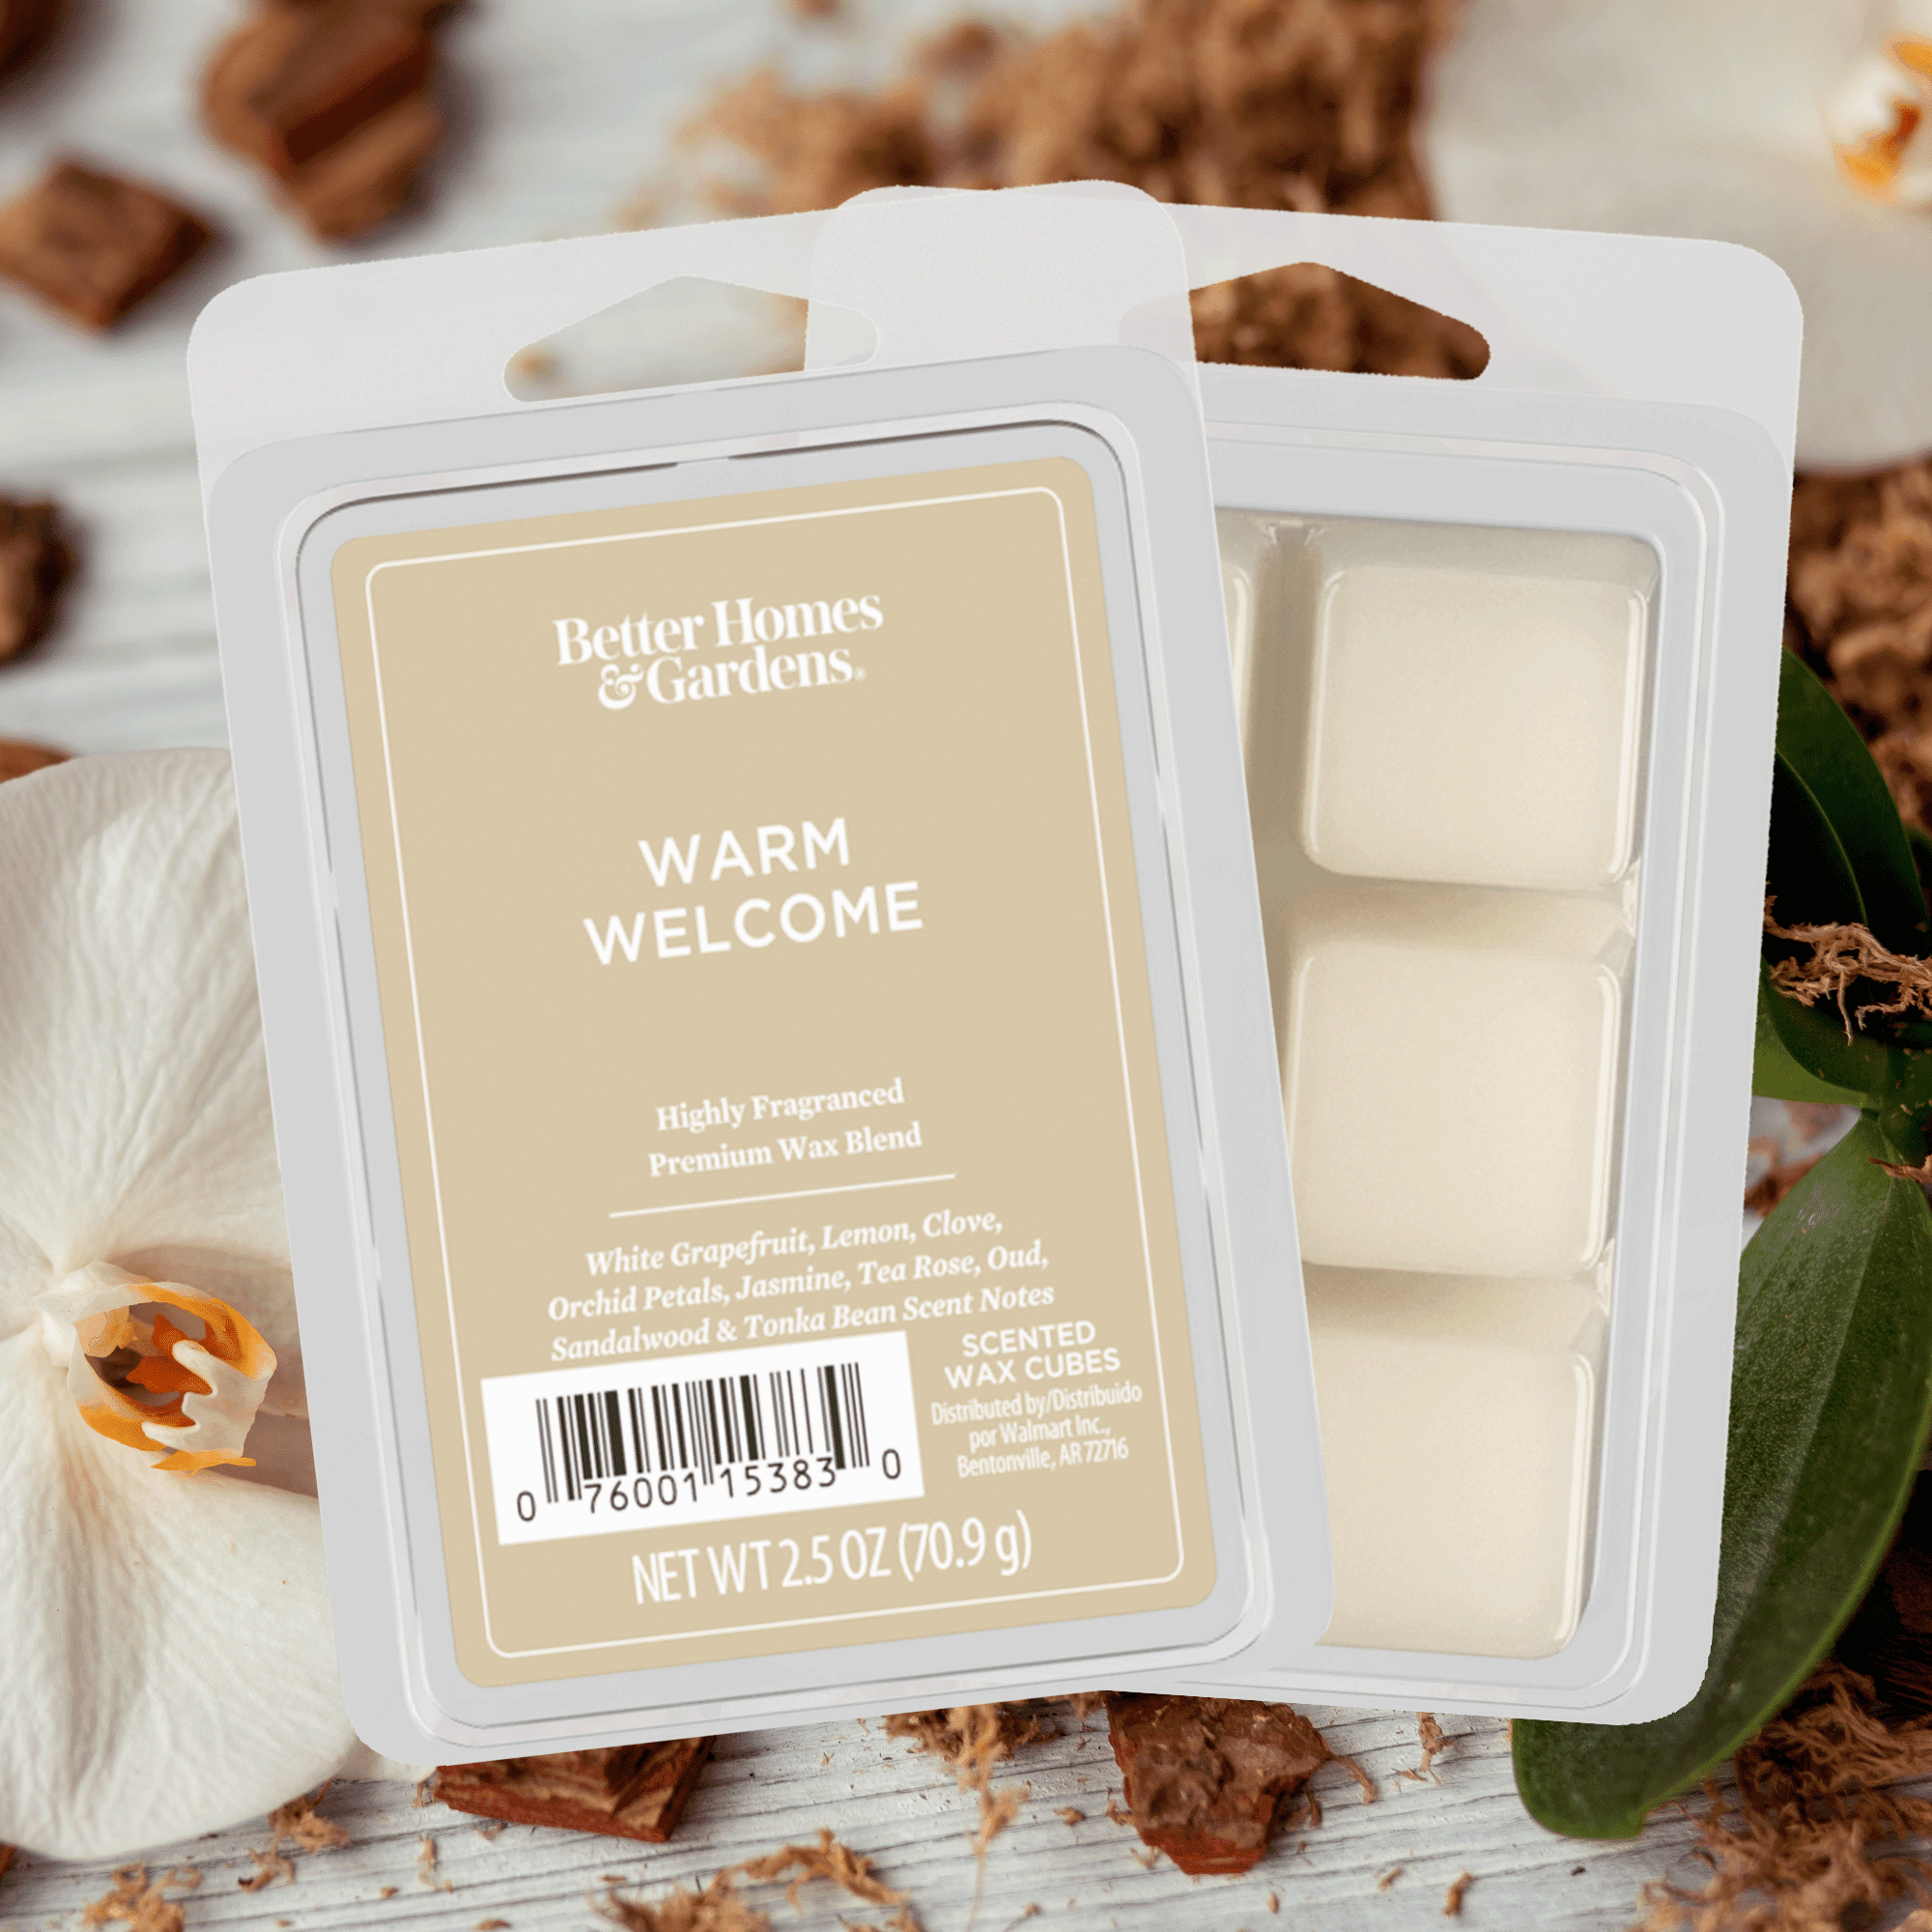 Introducing The Gel Wax Melt by Village Wax Melts - Parenting, Mental  Health & Lifestyle